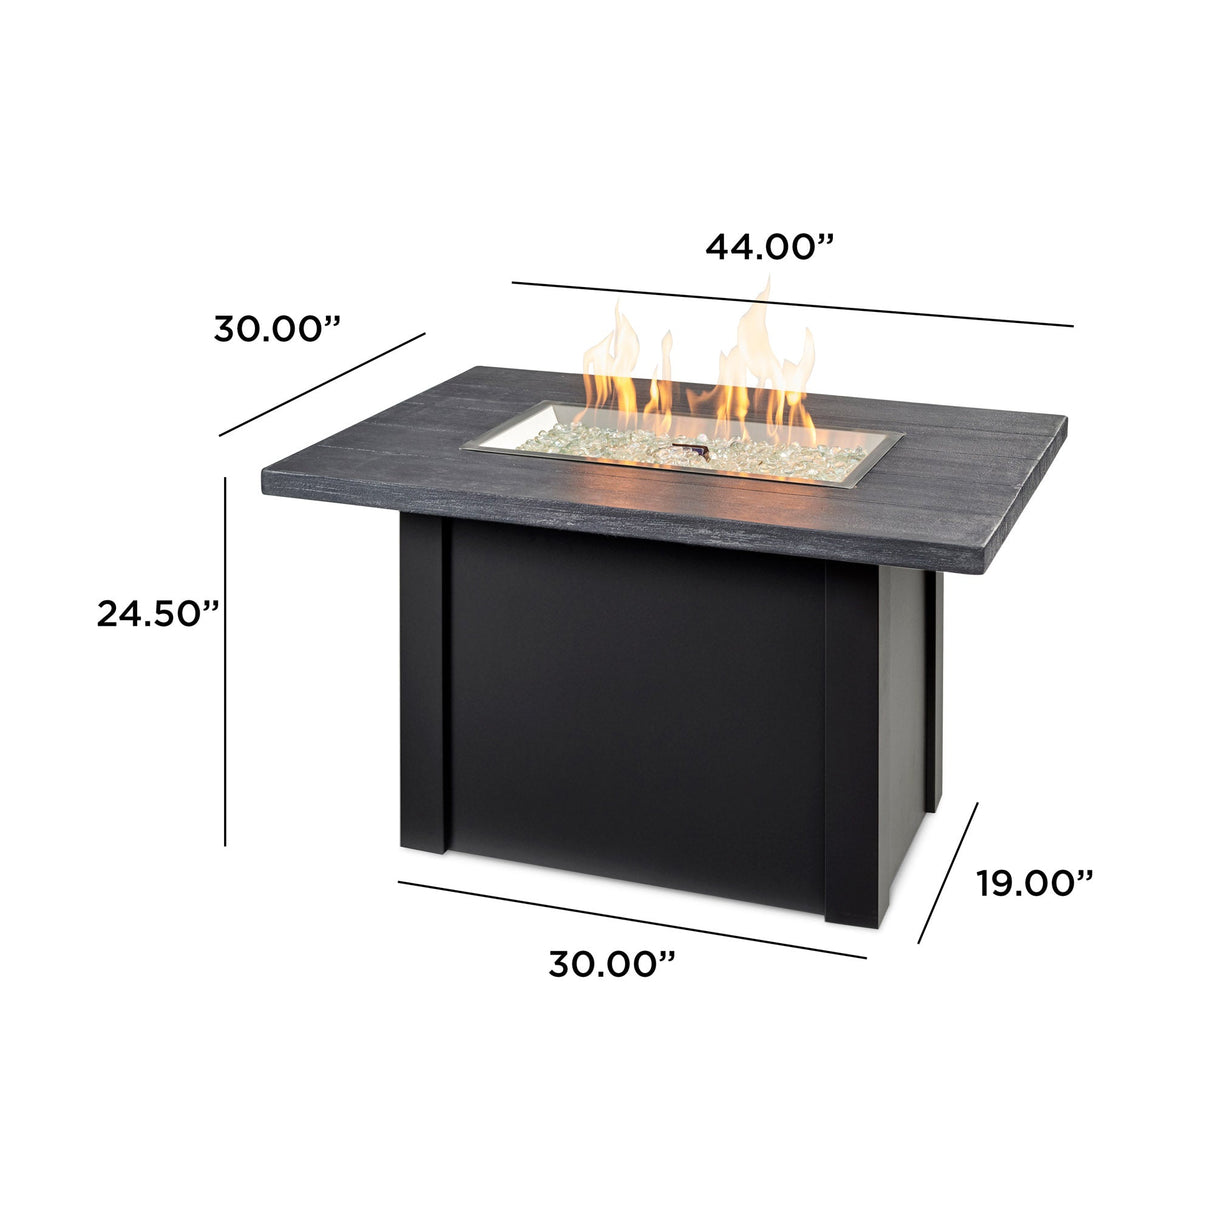 Dimensions overlaid on a Havenwood Rectangular Gas Fire Pit Table with a Carbon Grey top and Luverne Black base